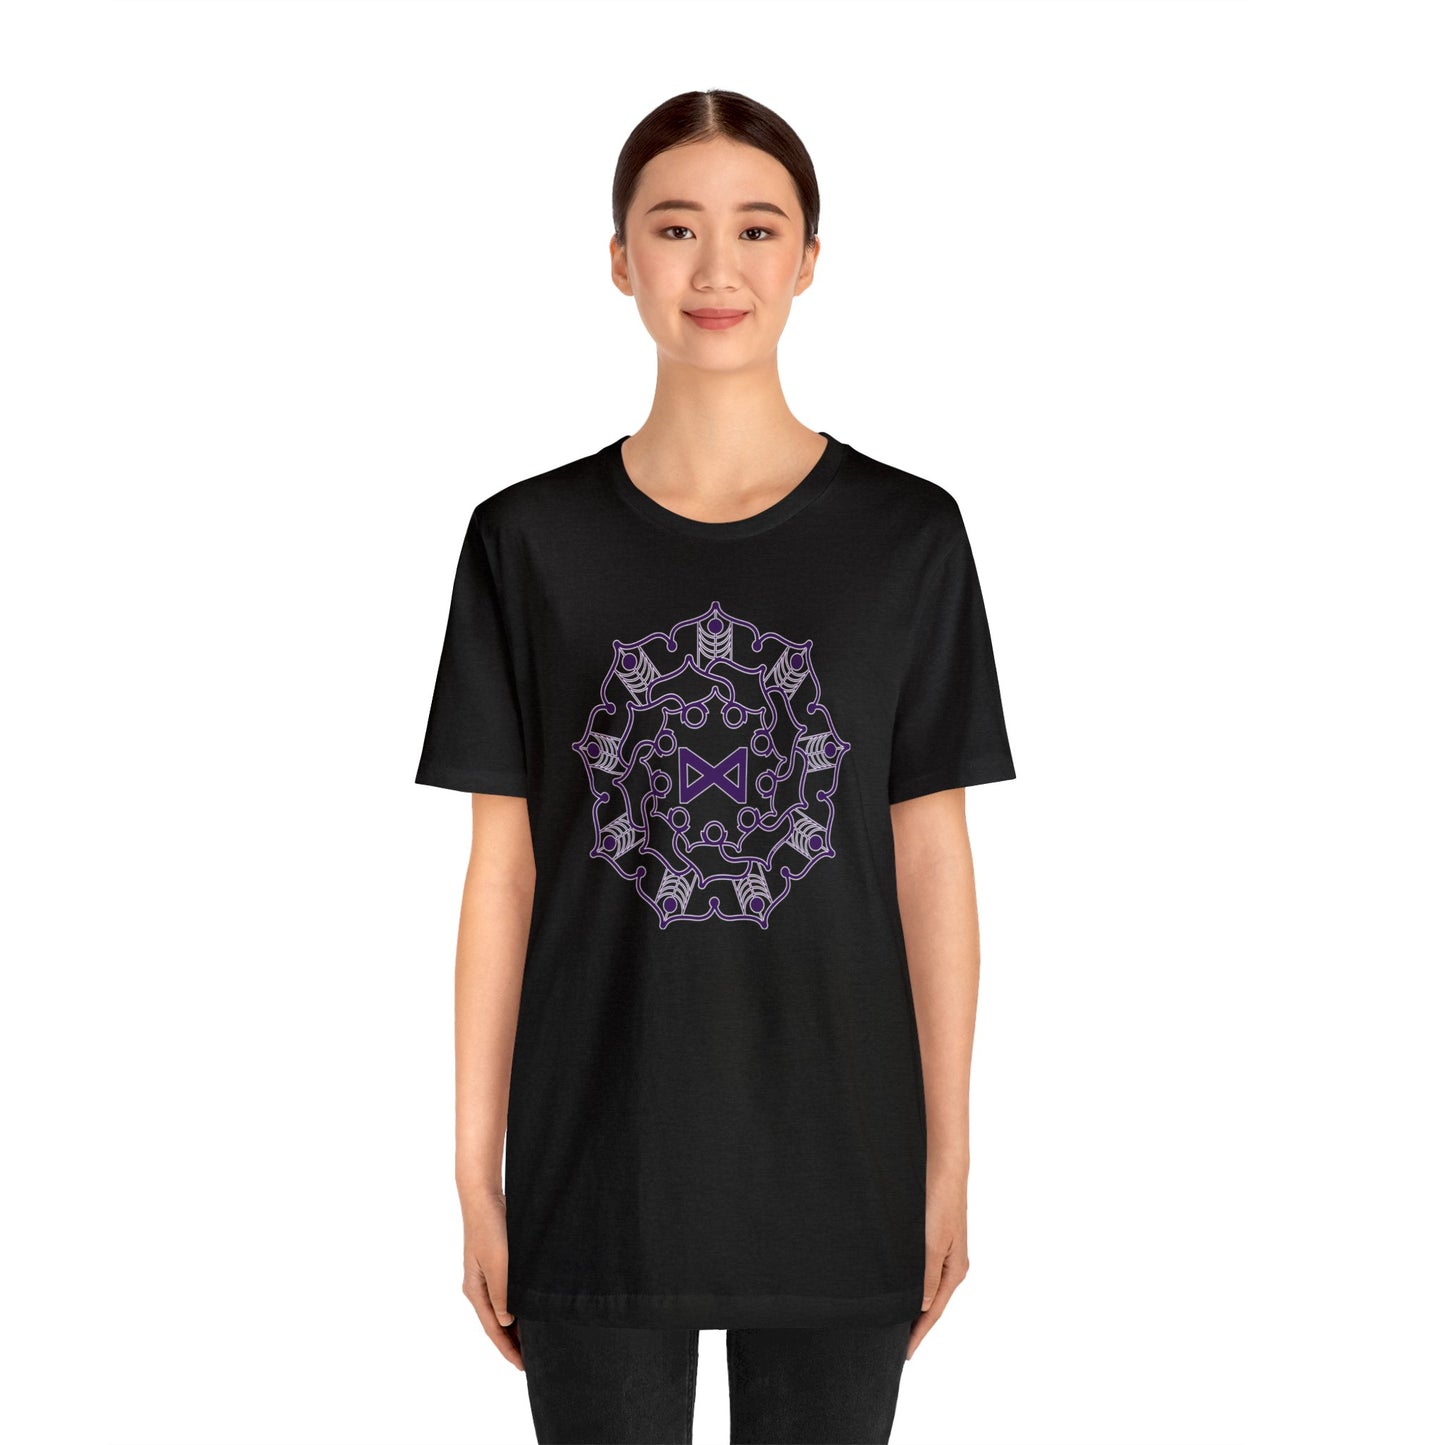 Spellcaster by Patti Negri "Intuition" Unisex Tee